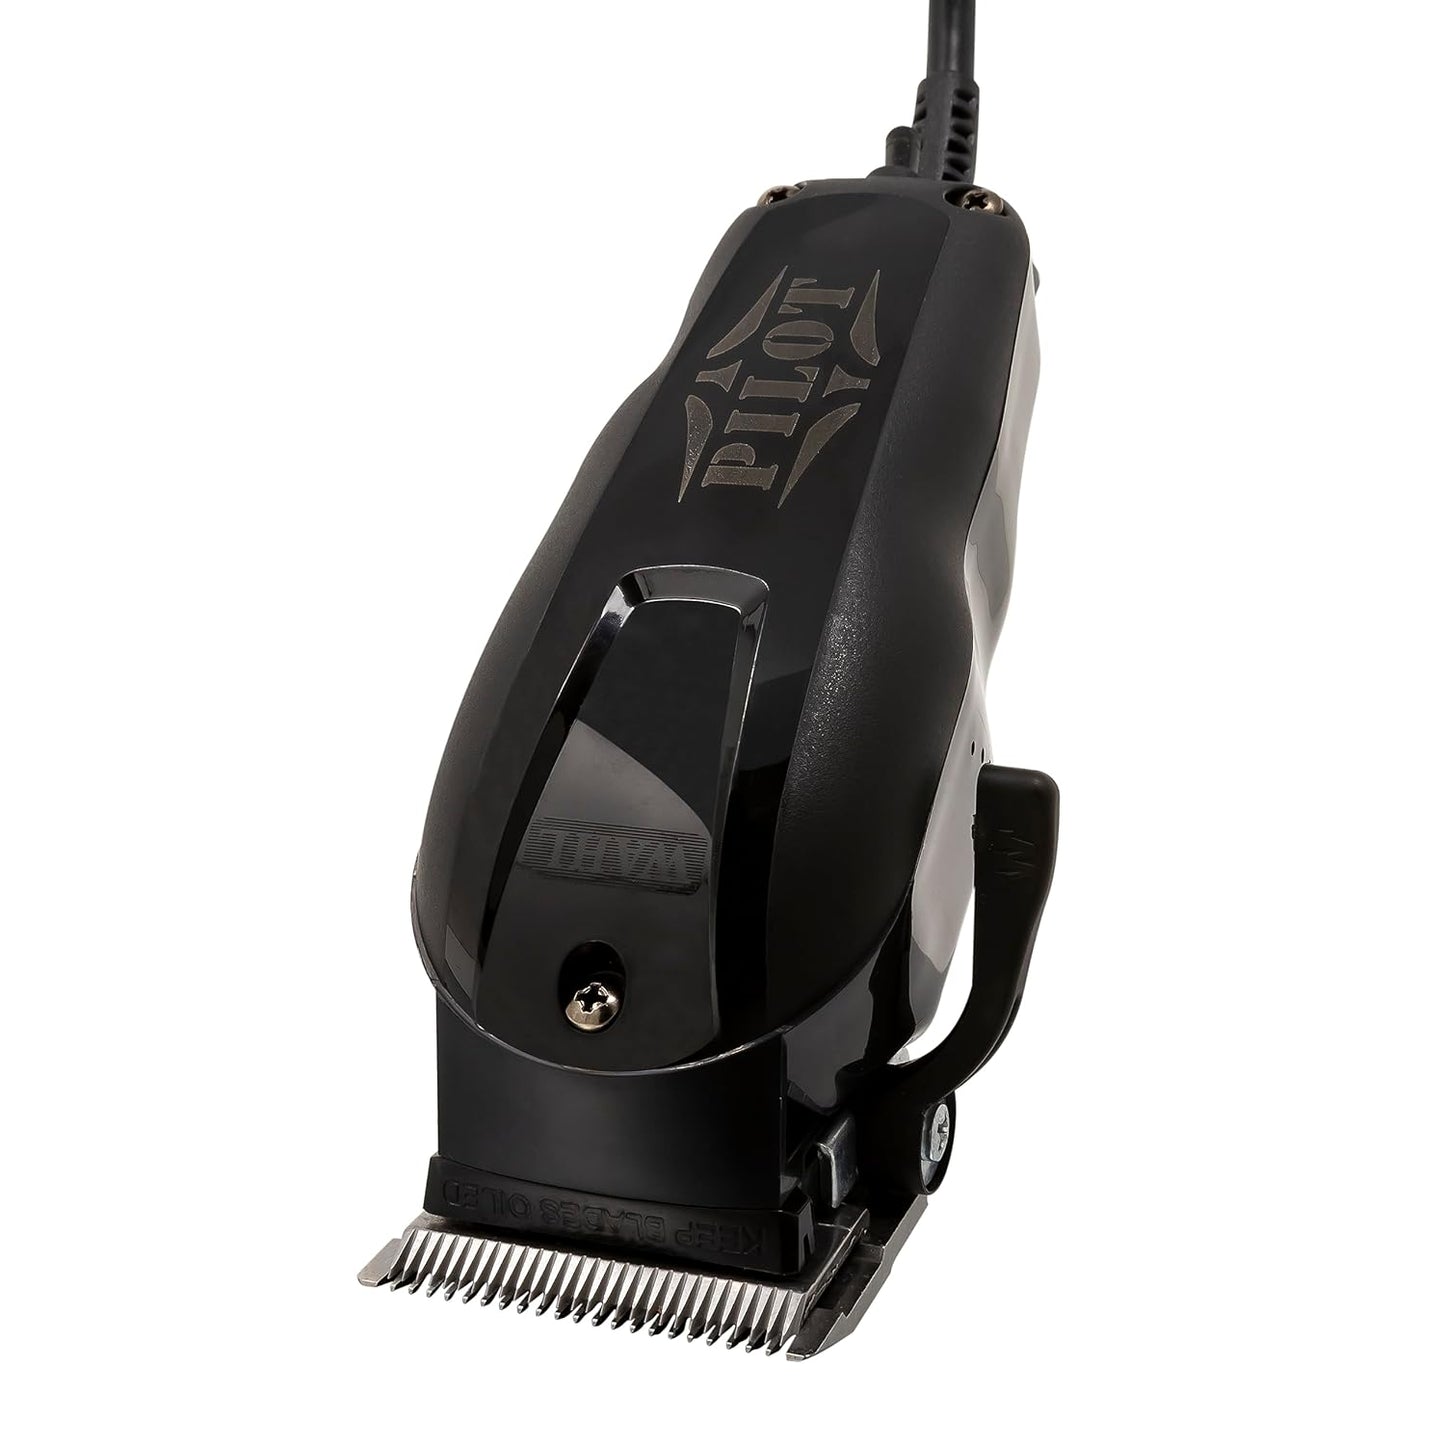 Wahl Professional Pilot Clipper #8483 2/3 Size of Normal Clipper with Full Size Blades, 1 Count